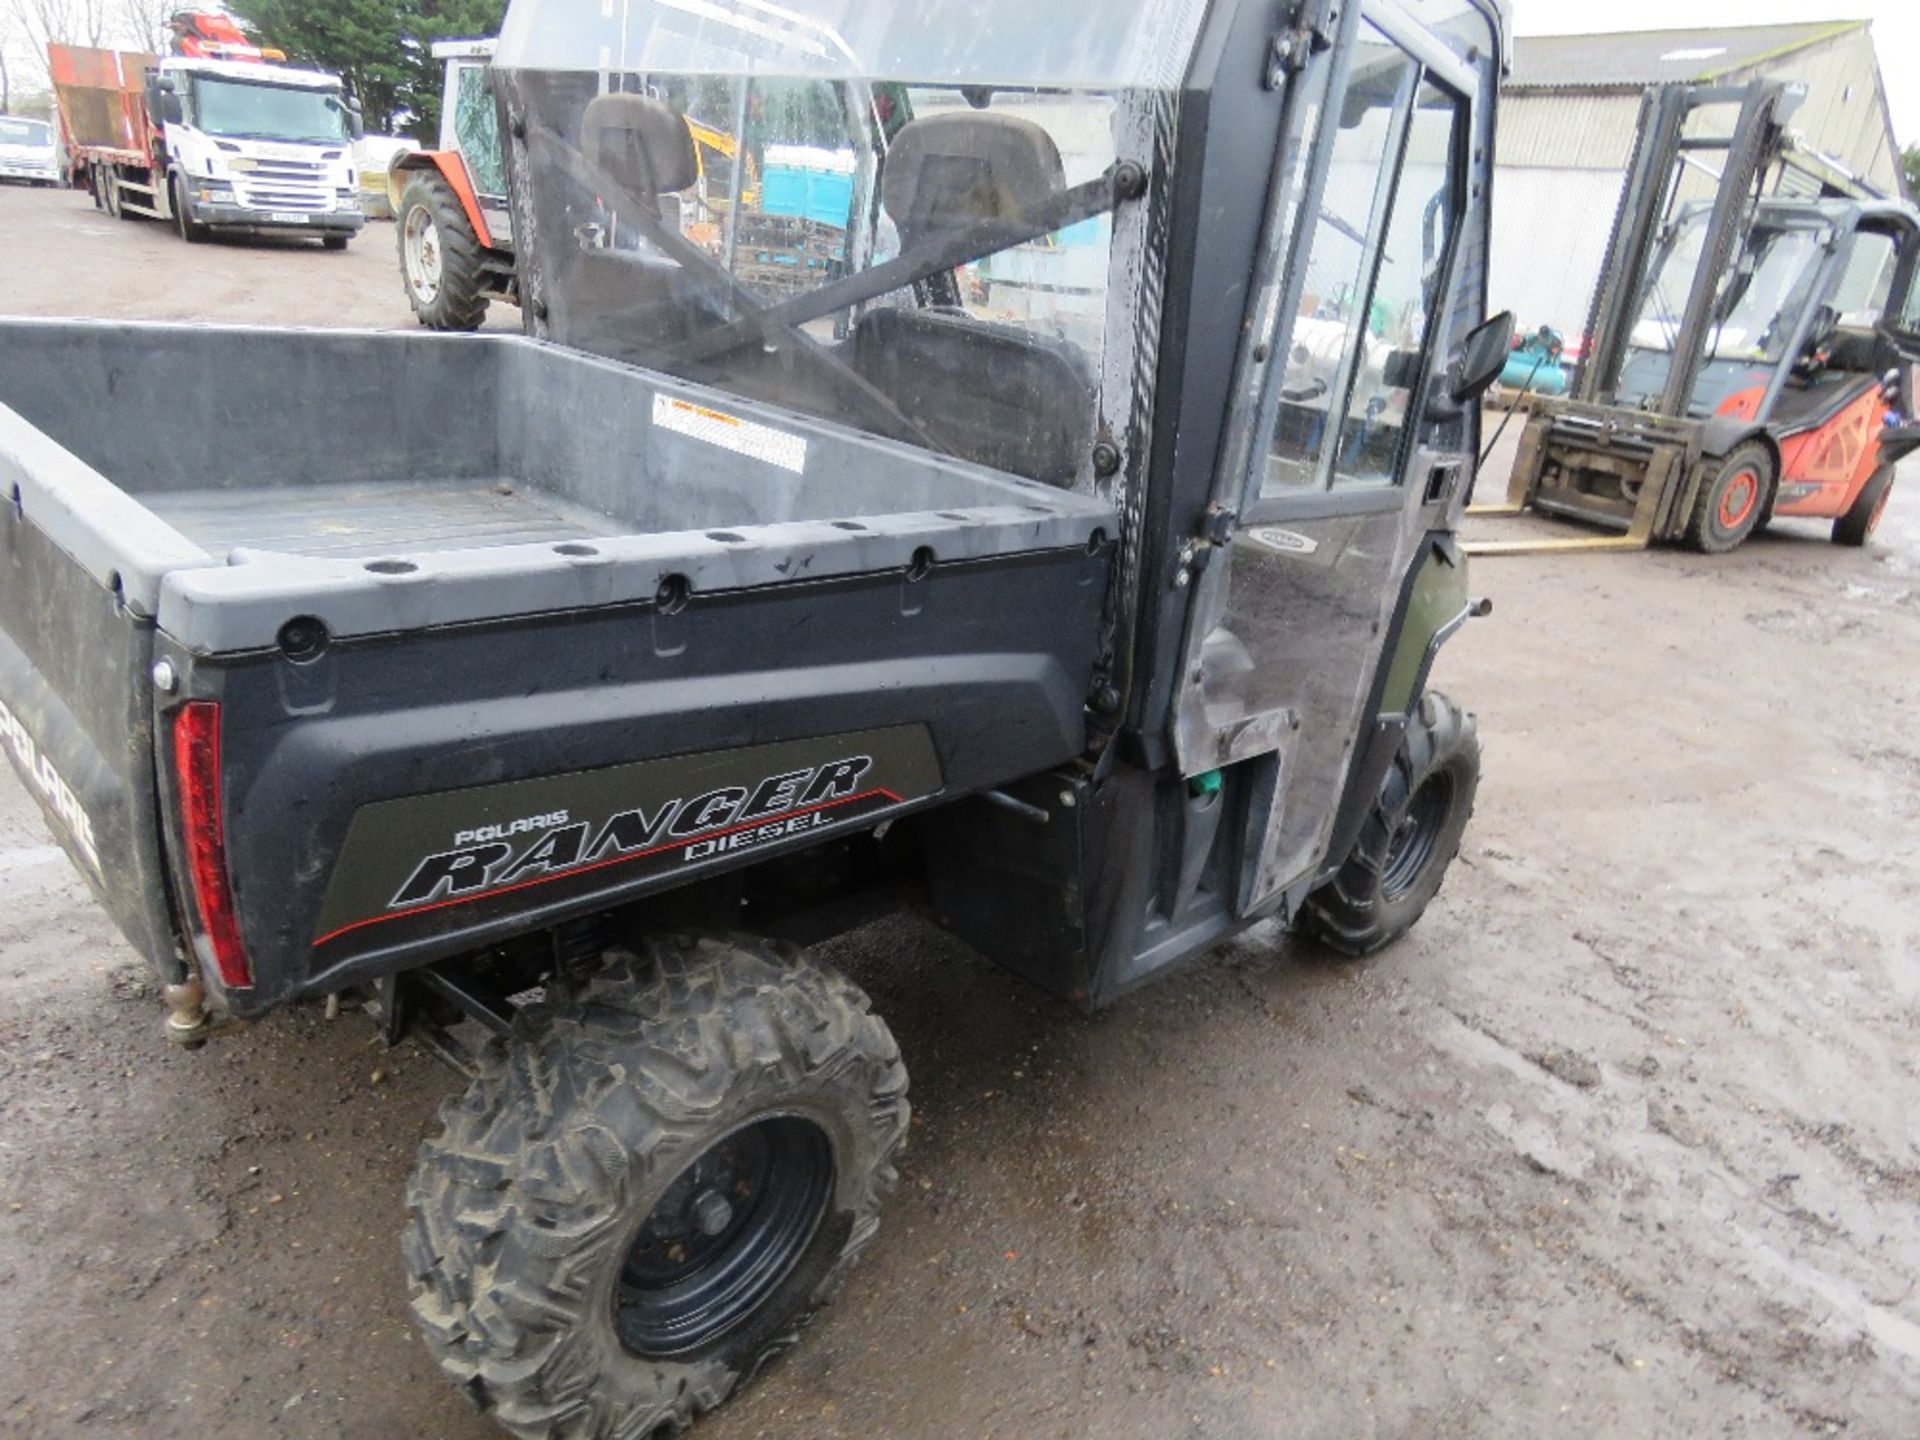 POLARIS 900D CABBED RANGER DIESEL ENGINED ROUGH TERRAIN OFF ROAD BUGGY UTILITY VEHICLE 1363 REC HOUR - Image 8 of 9